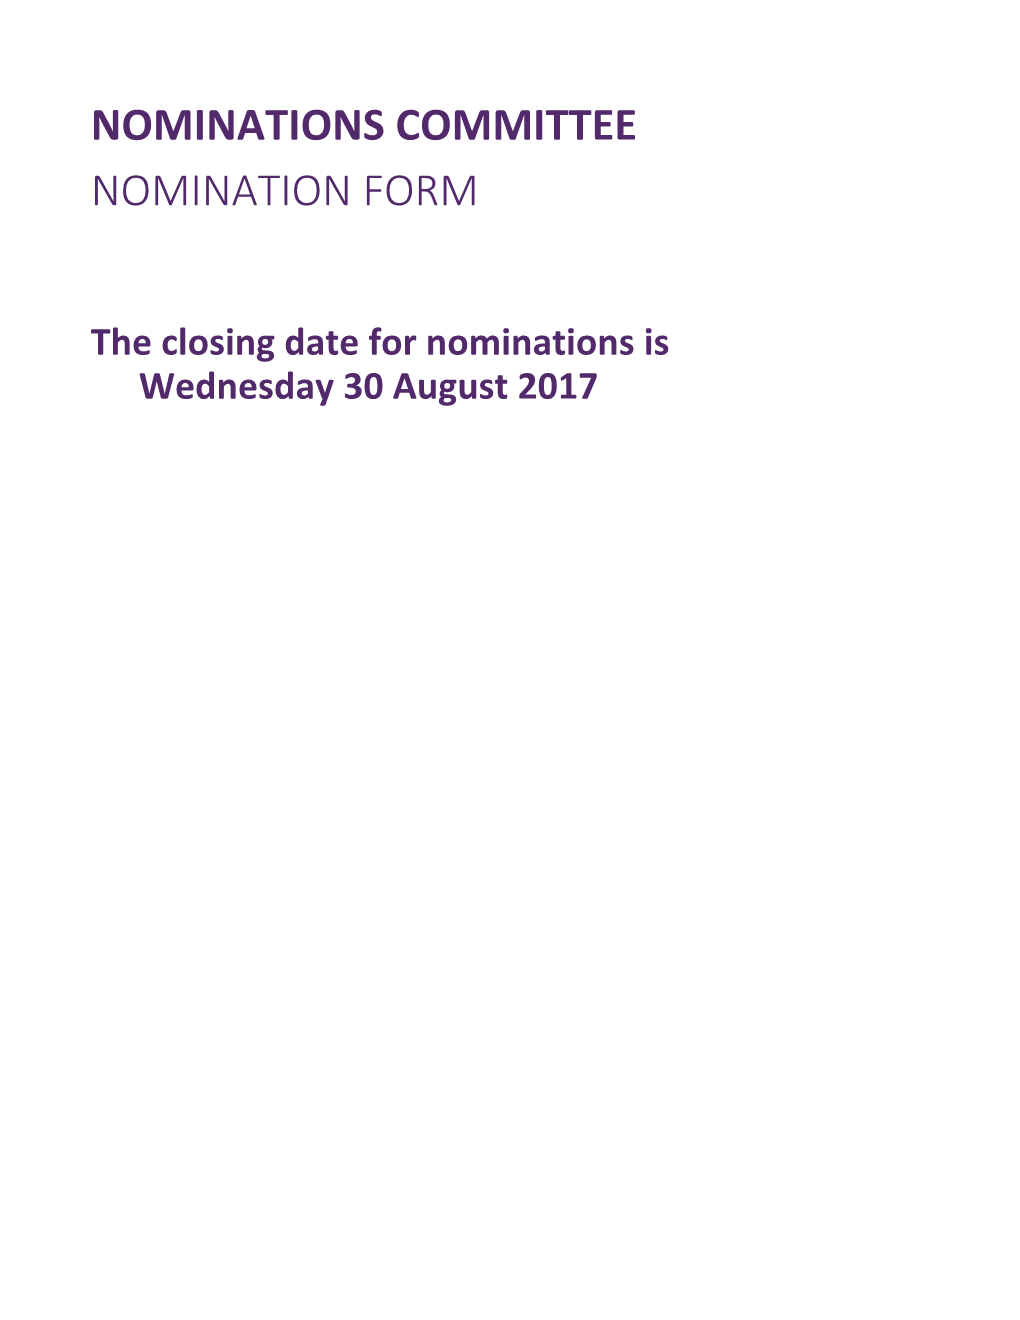 Nominations Committee